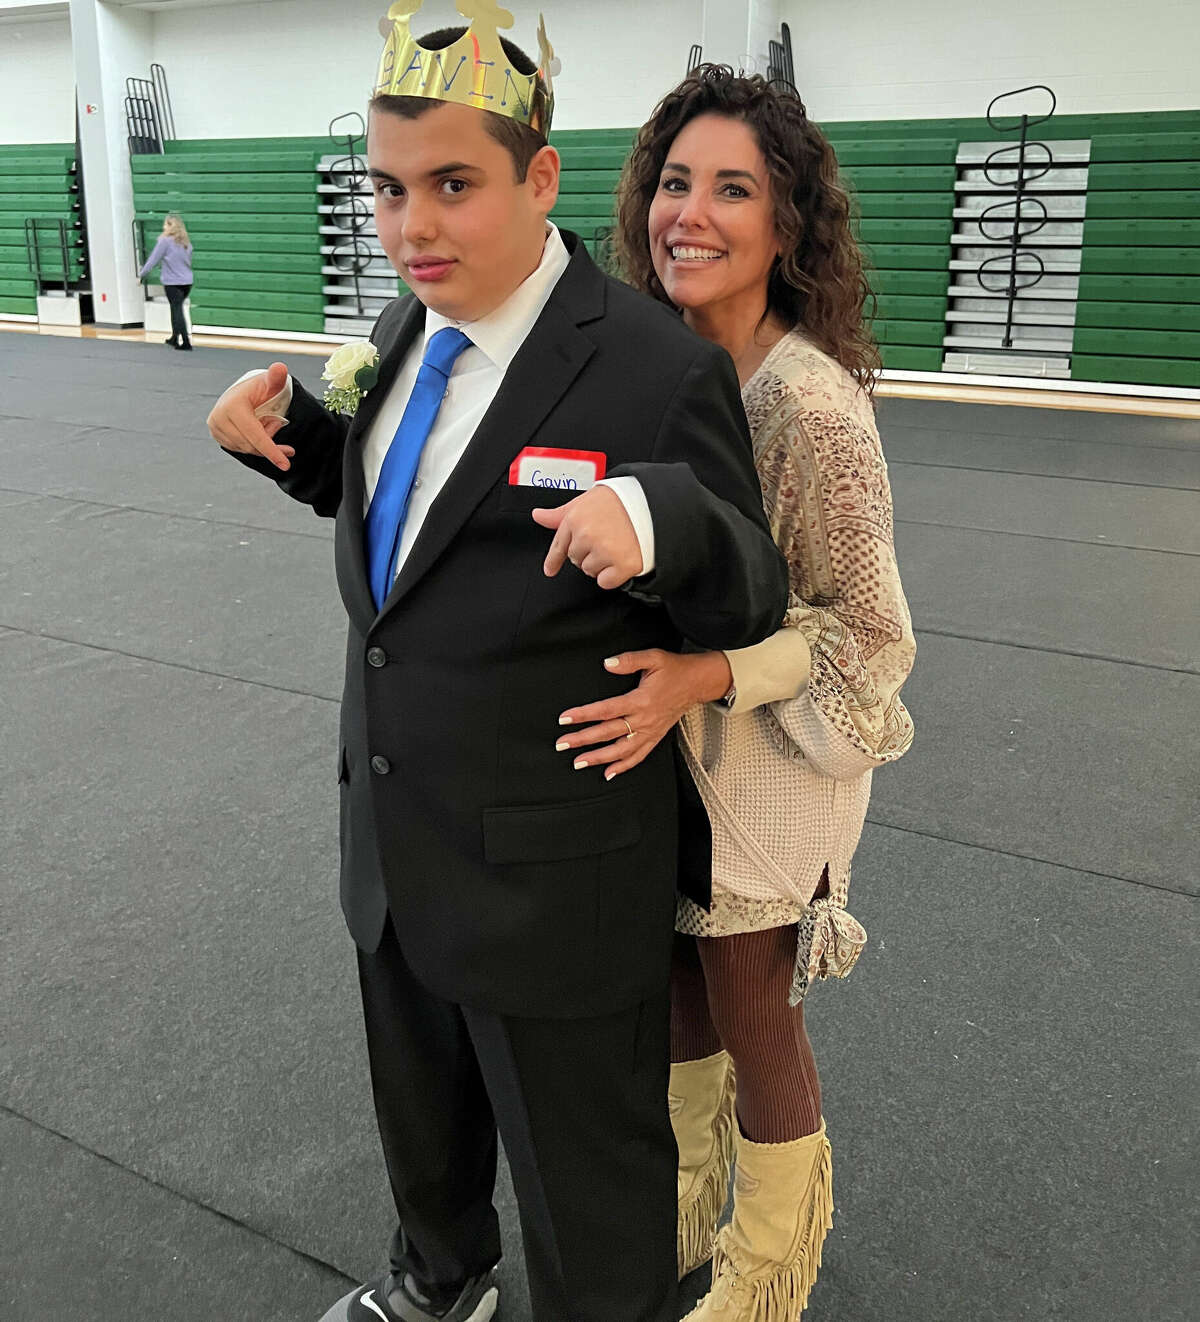 Gavin Toscano-Popick with his mother, Linda Toscano, at the Unified Prom on Oct. 26, 2022.